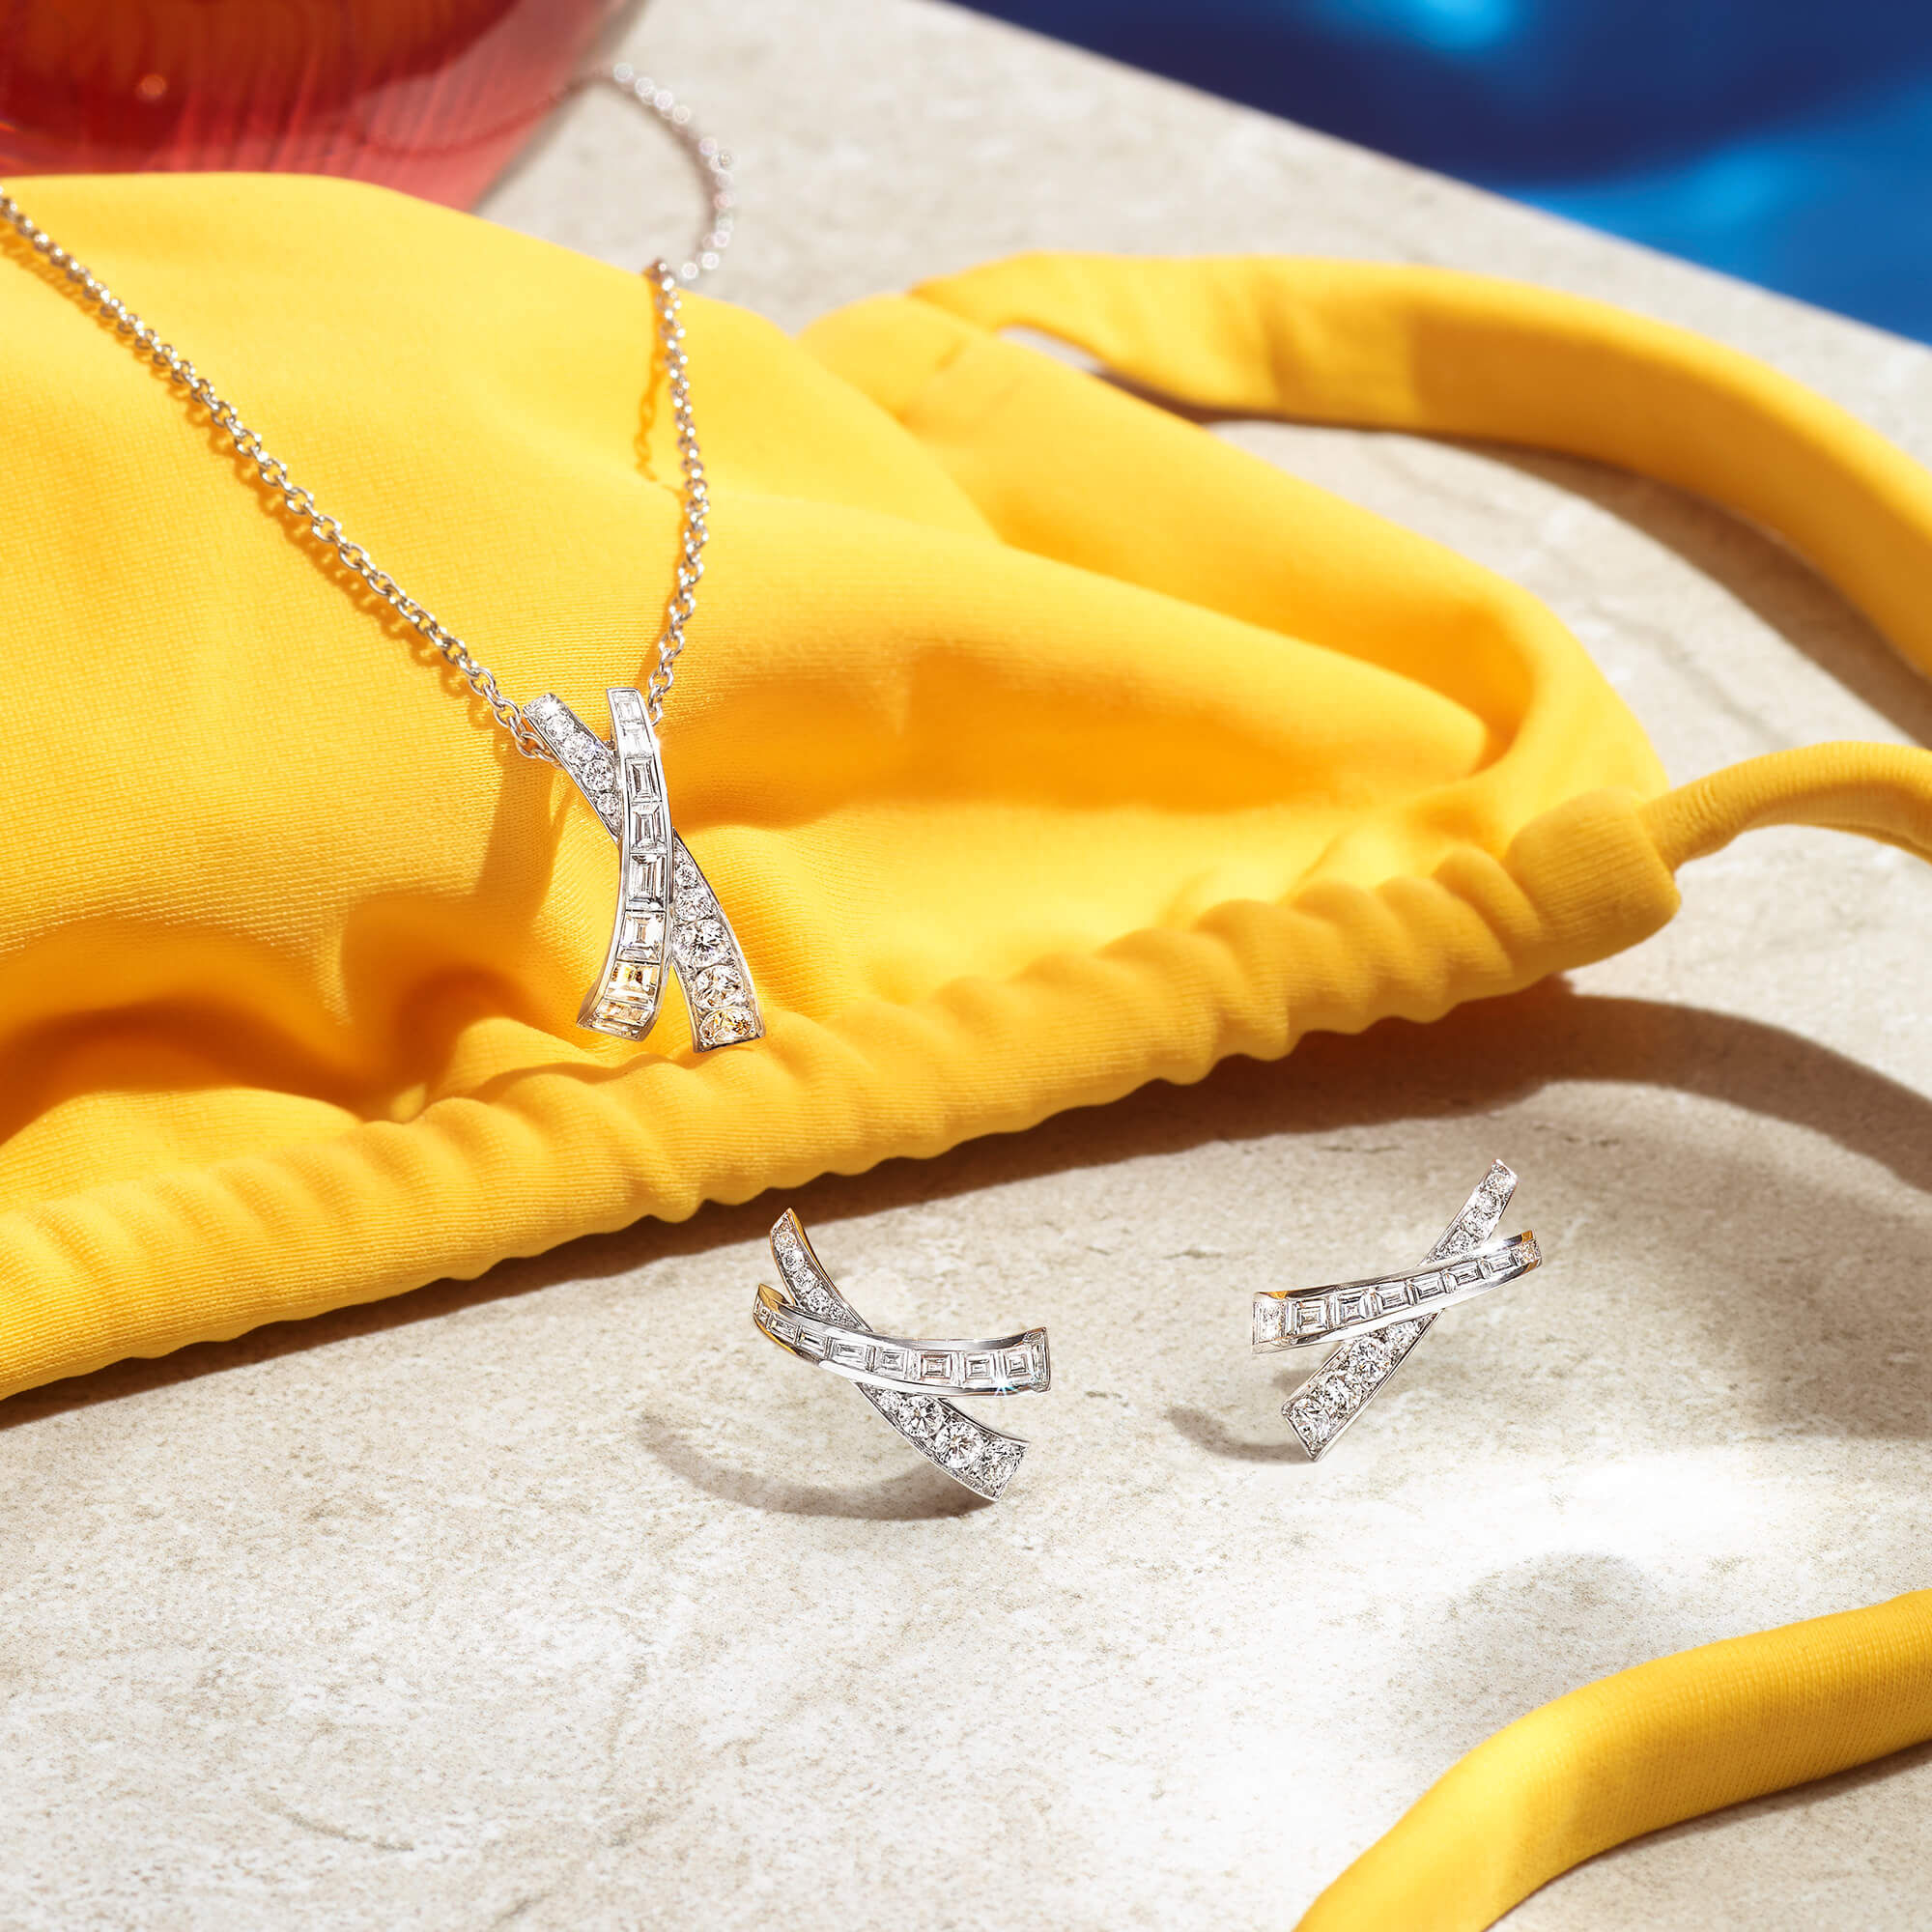  Close up of the Graff Kiss collection diamond and pendant at a pool side